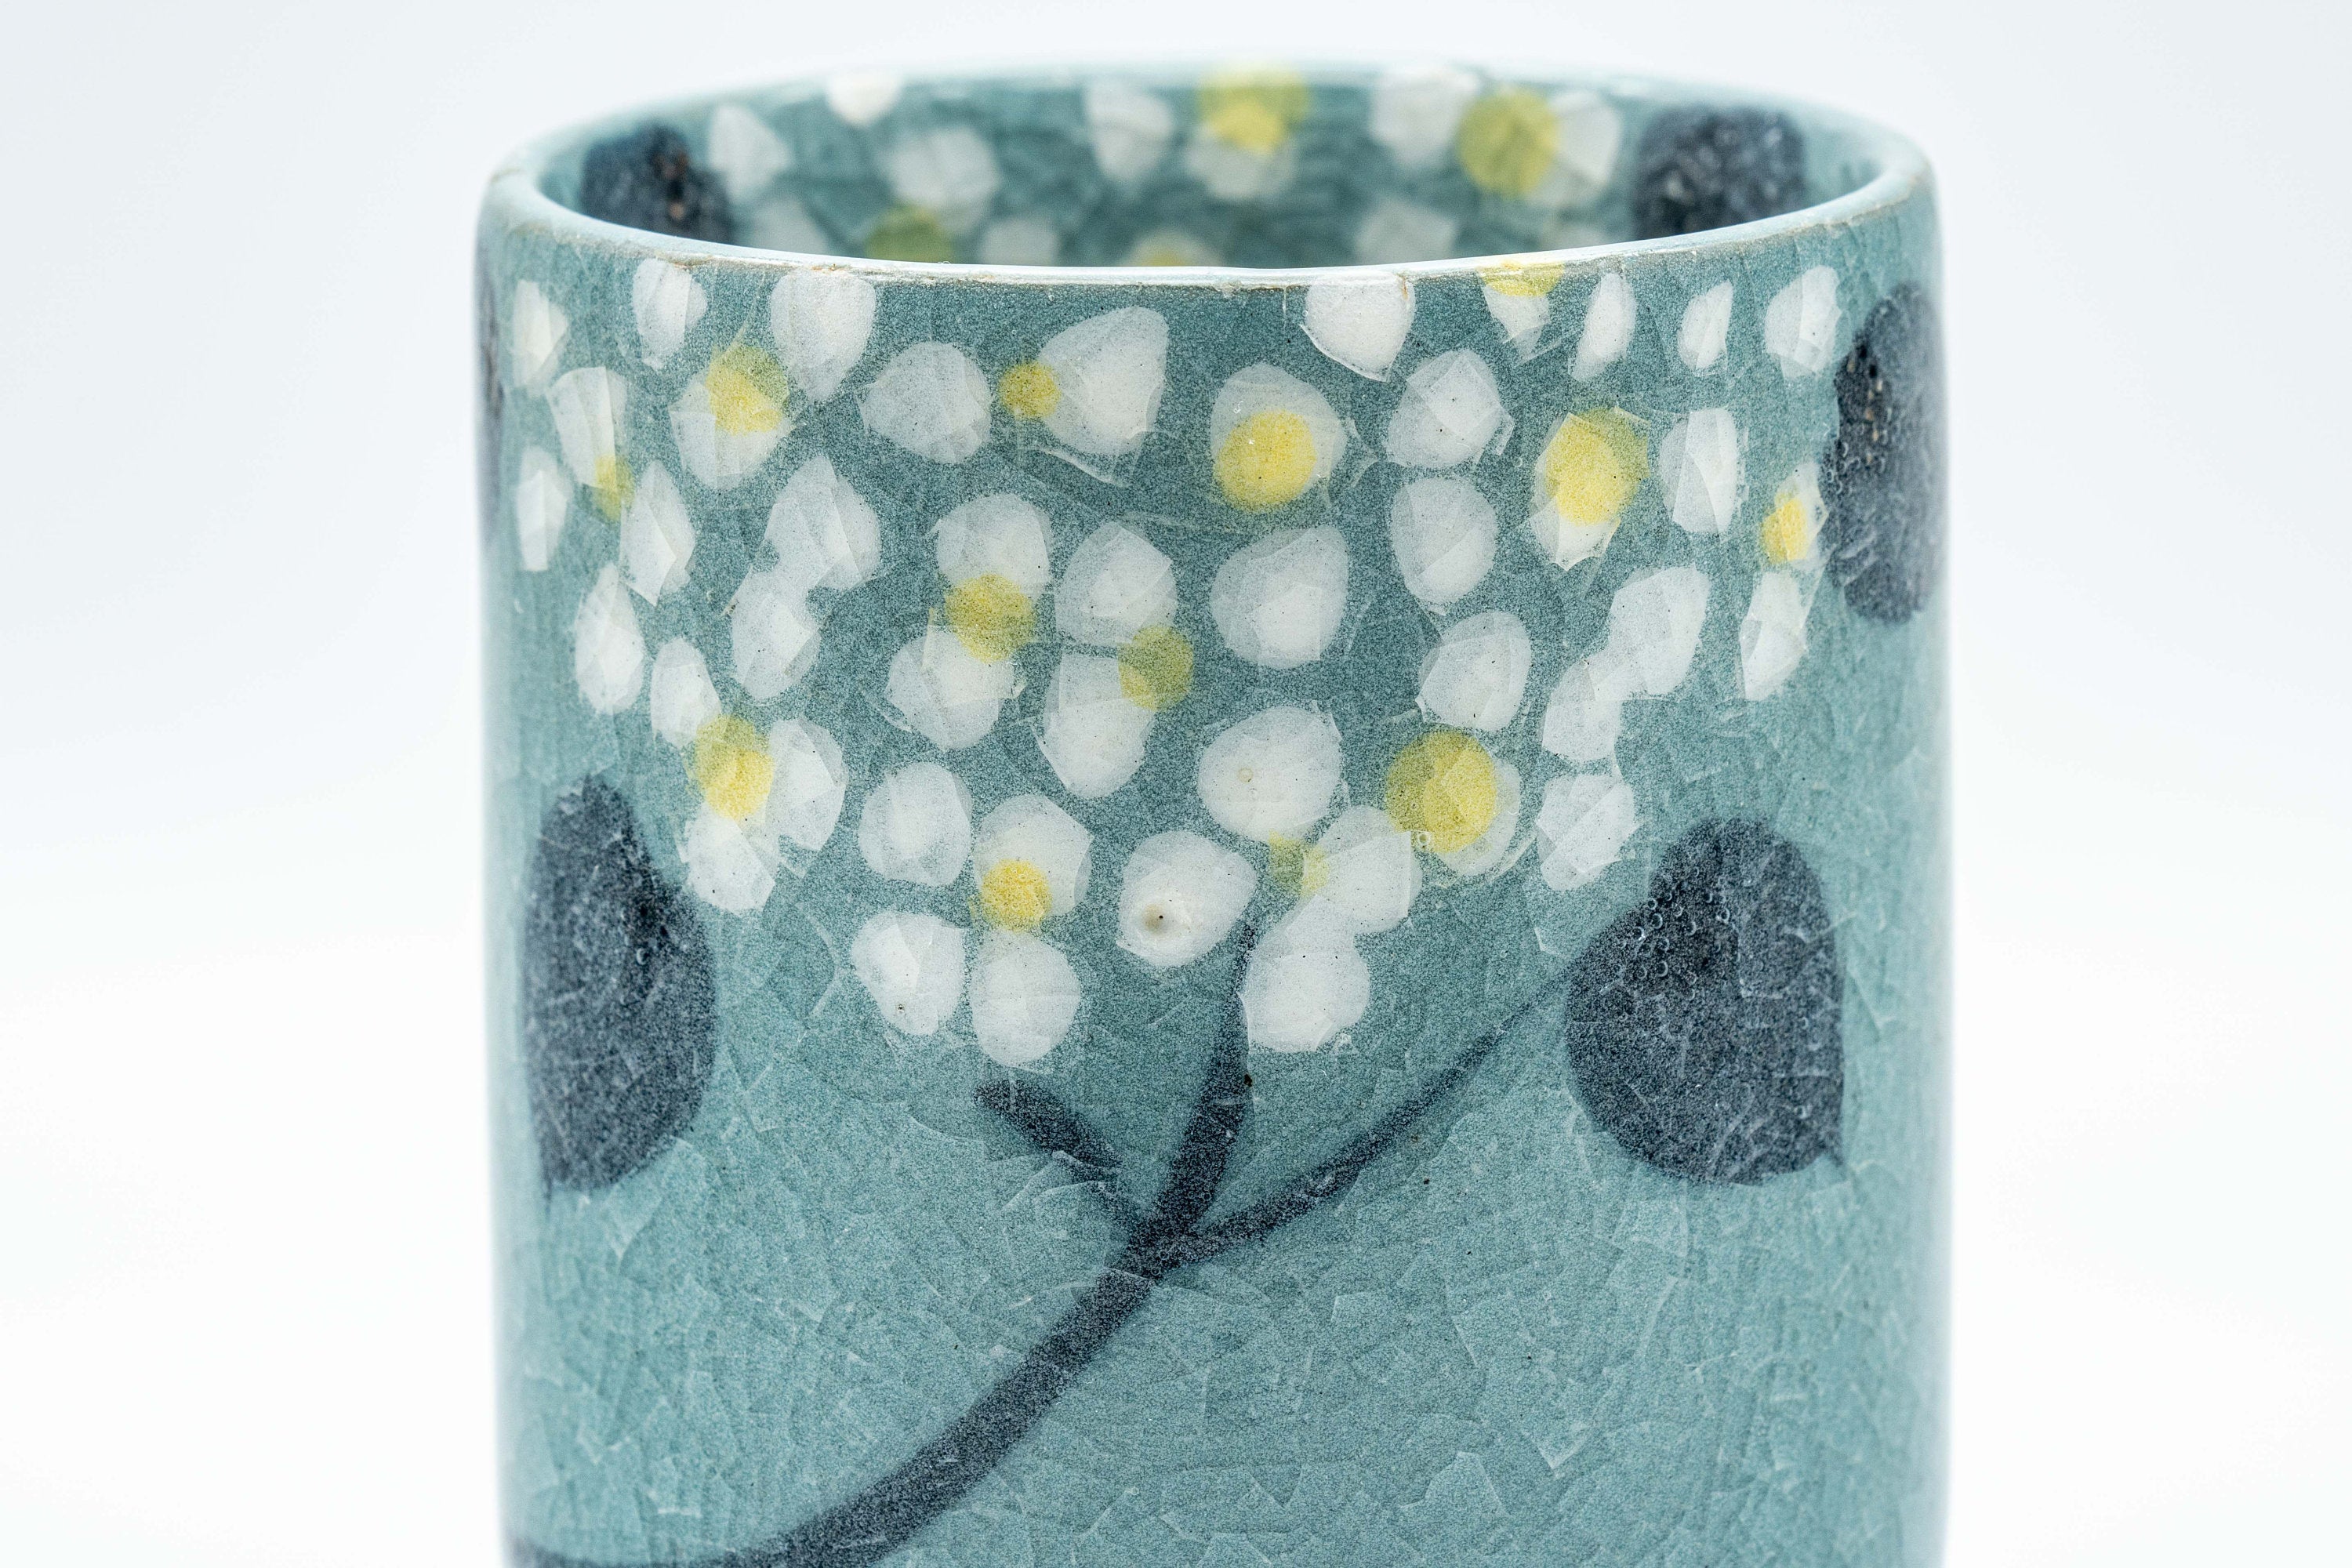 Japanese Teacup - Robin's Egg Blue Yunomi with Painted Flowers  - 150ml